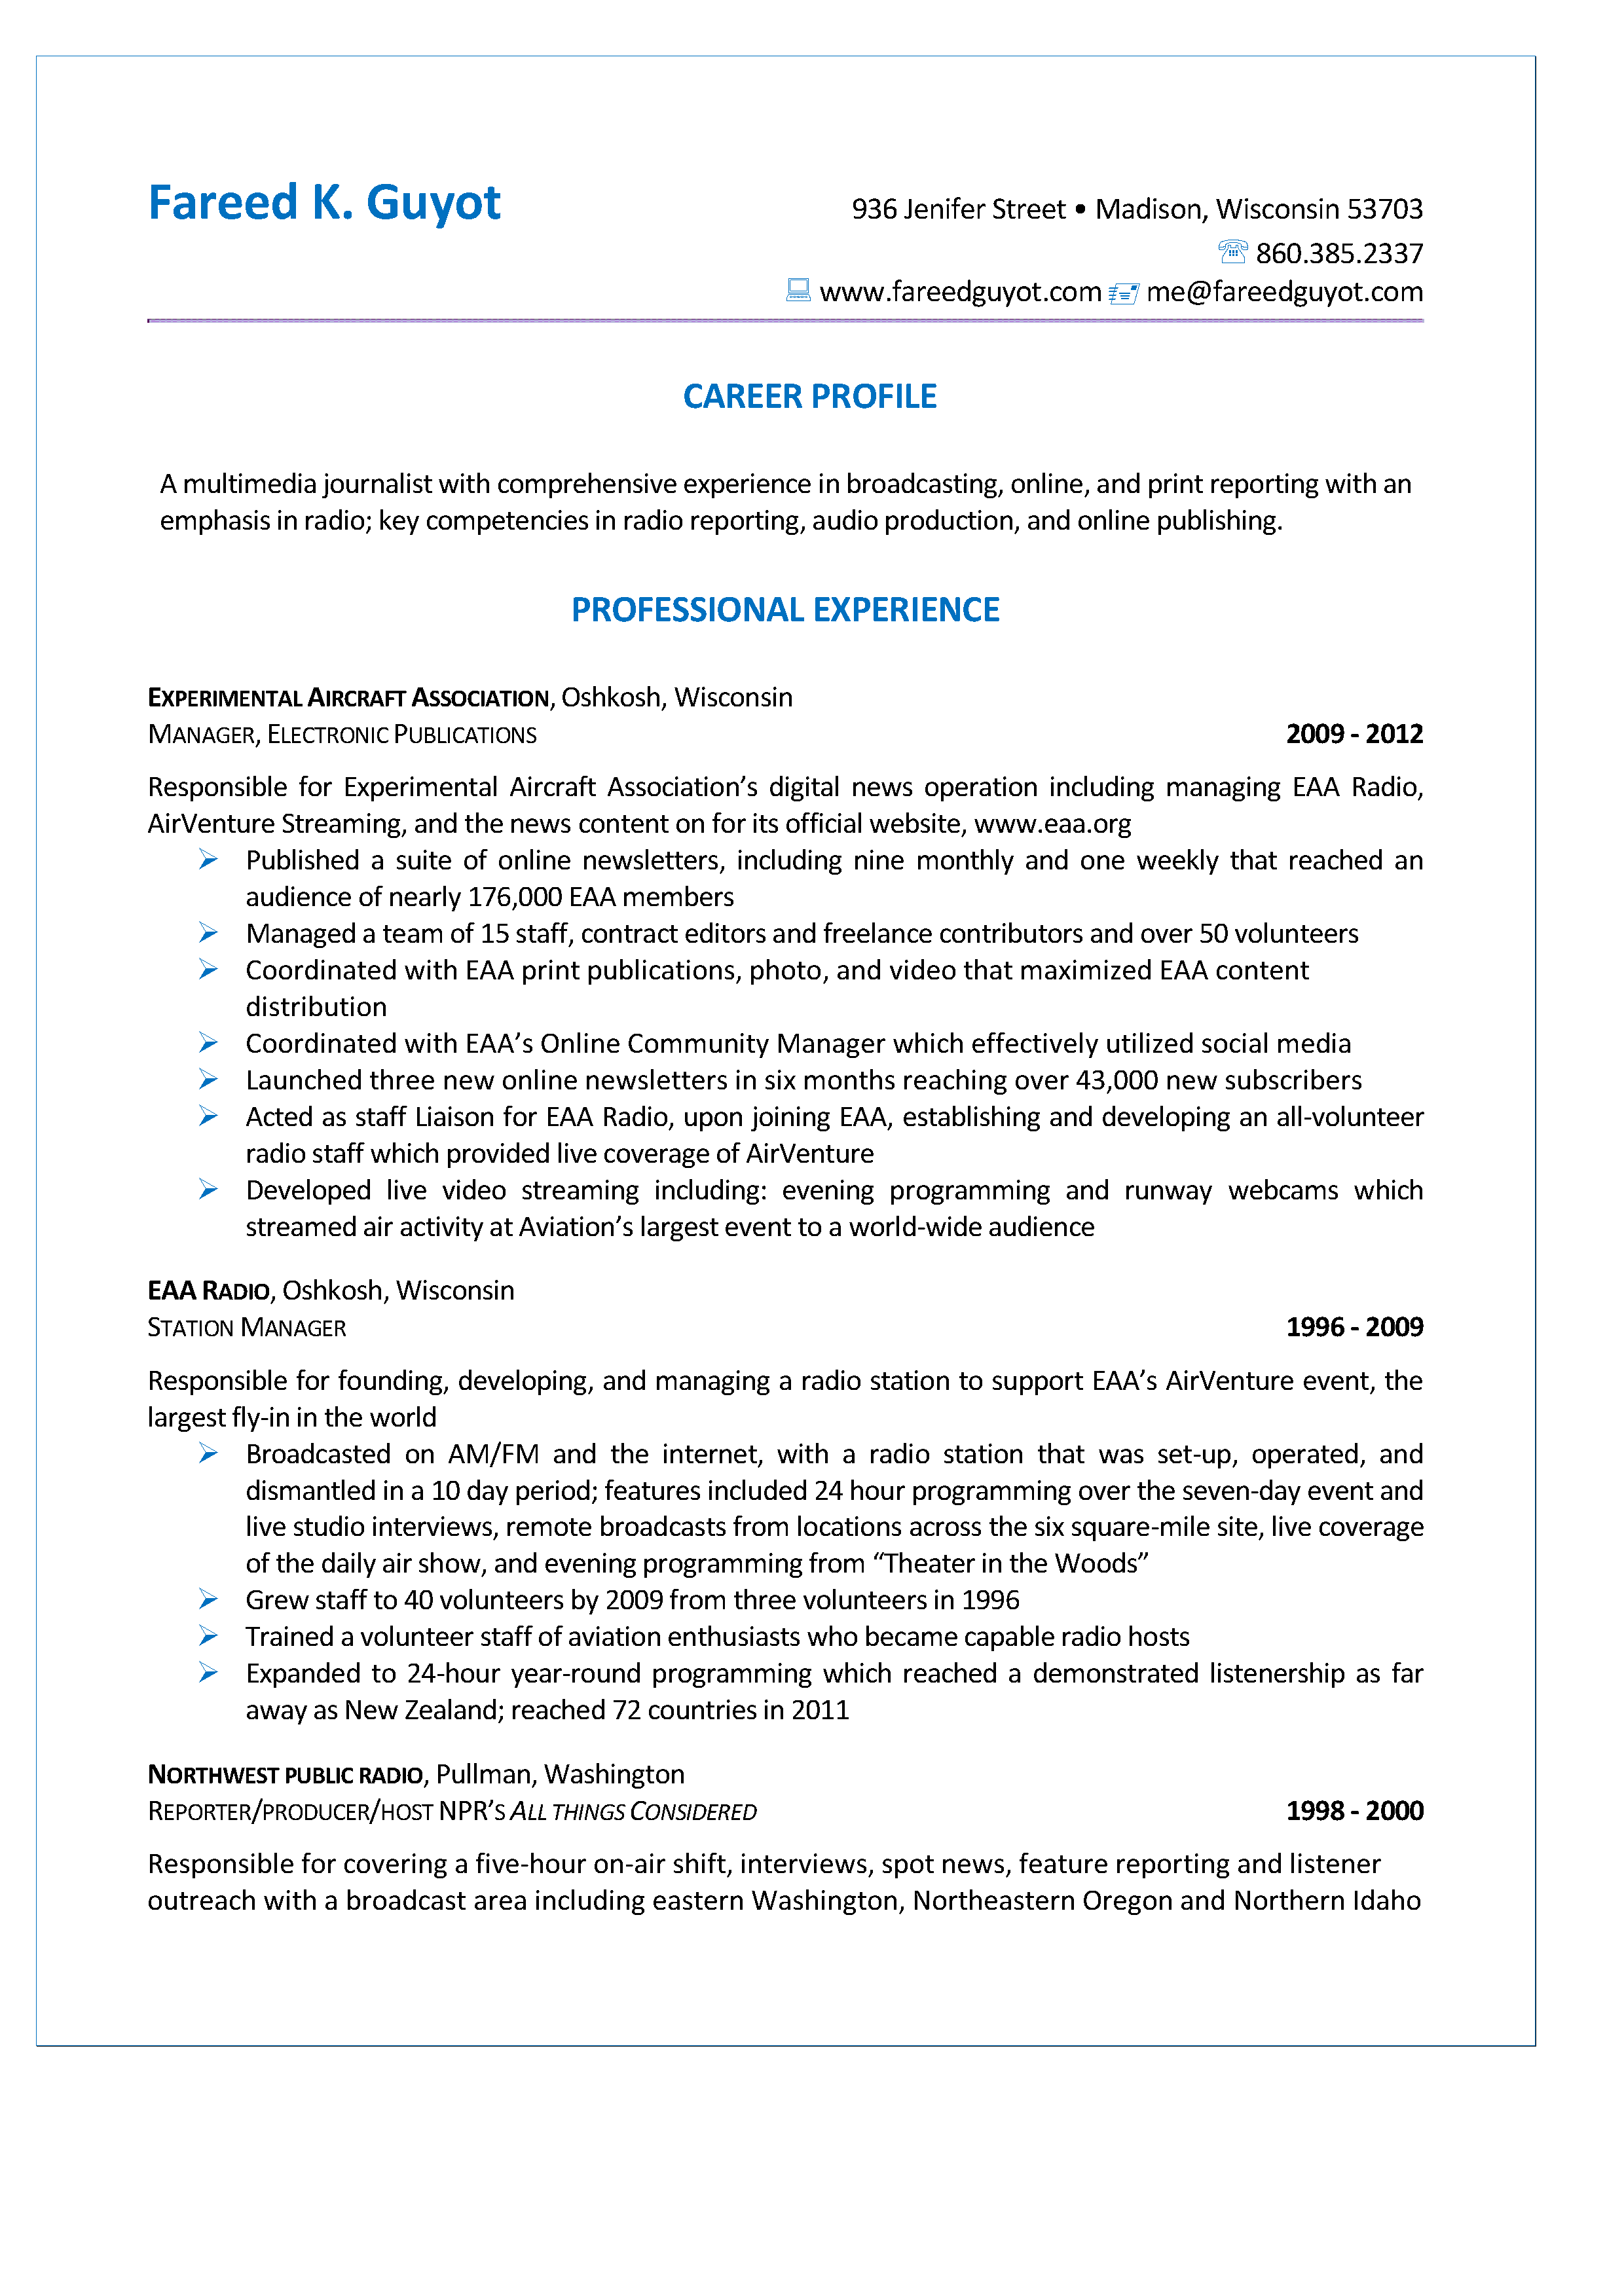 Resume - Page 1